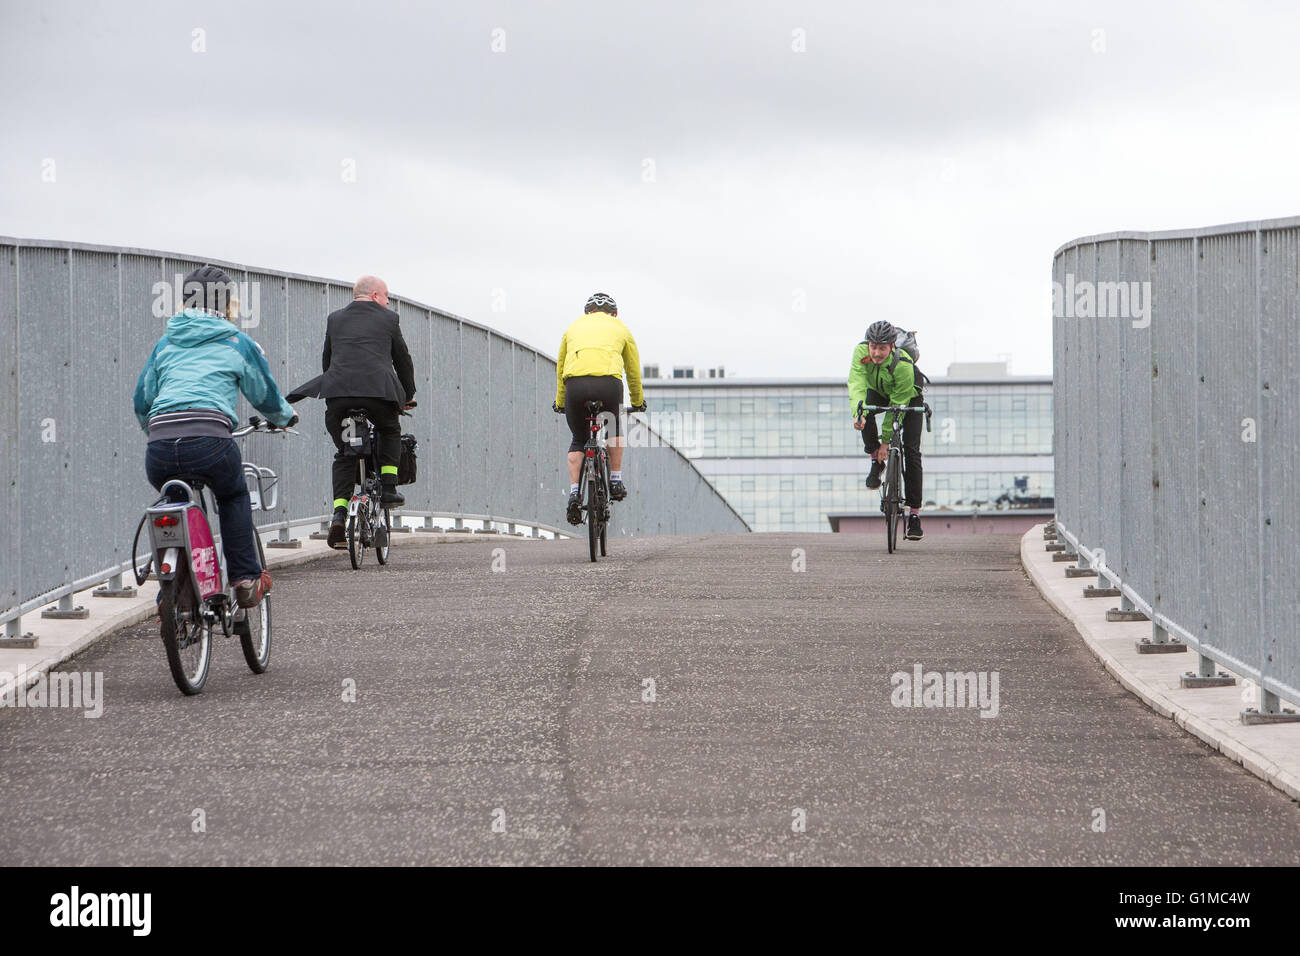 Cyclists using cycle paths Stock Photo